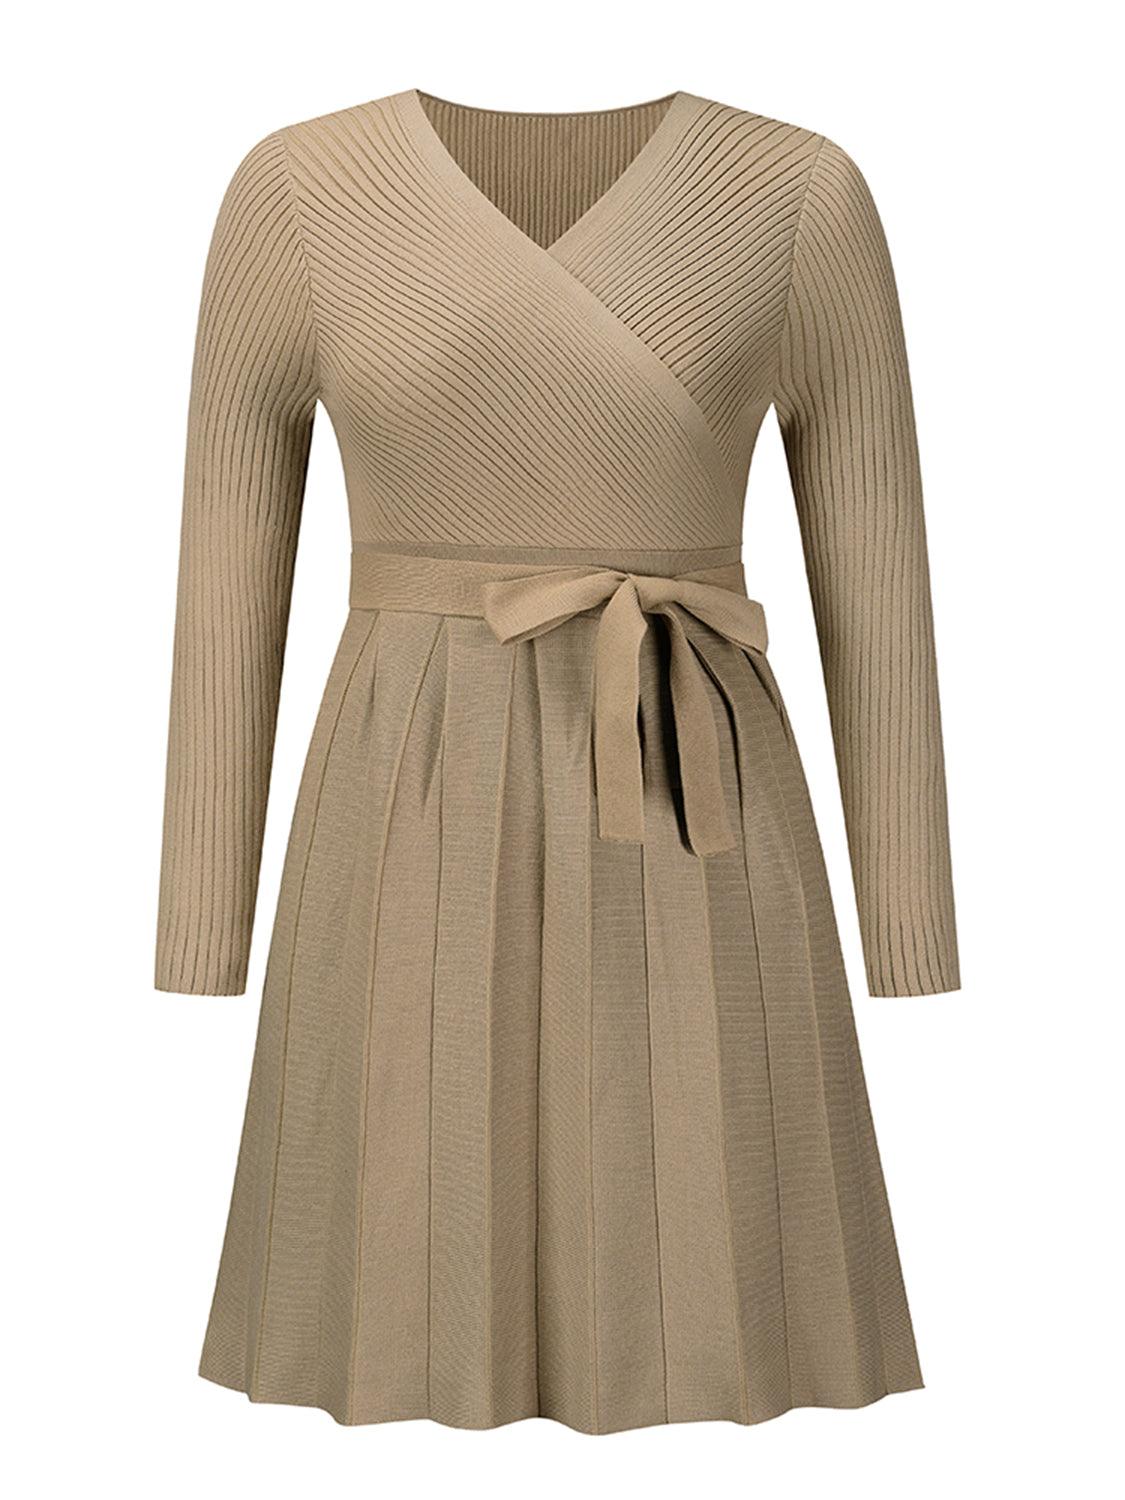 Surplice Neck Tie Front Pleated Sweater Dress - Lab Fashion, Home & Health